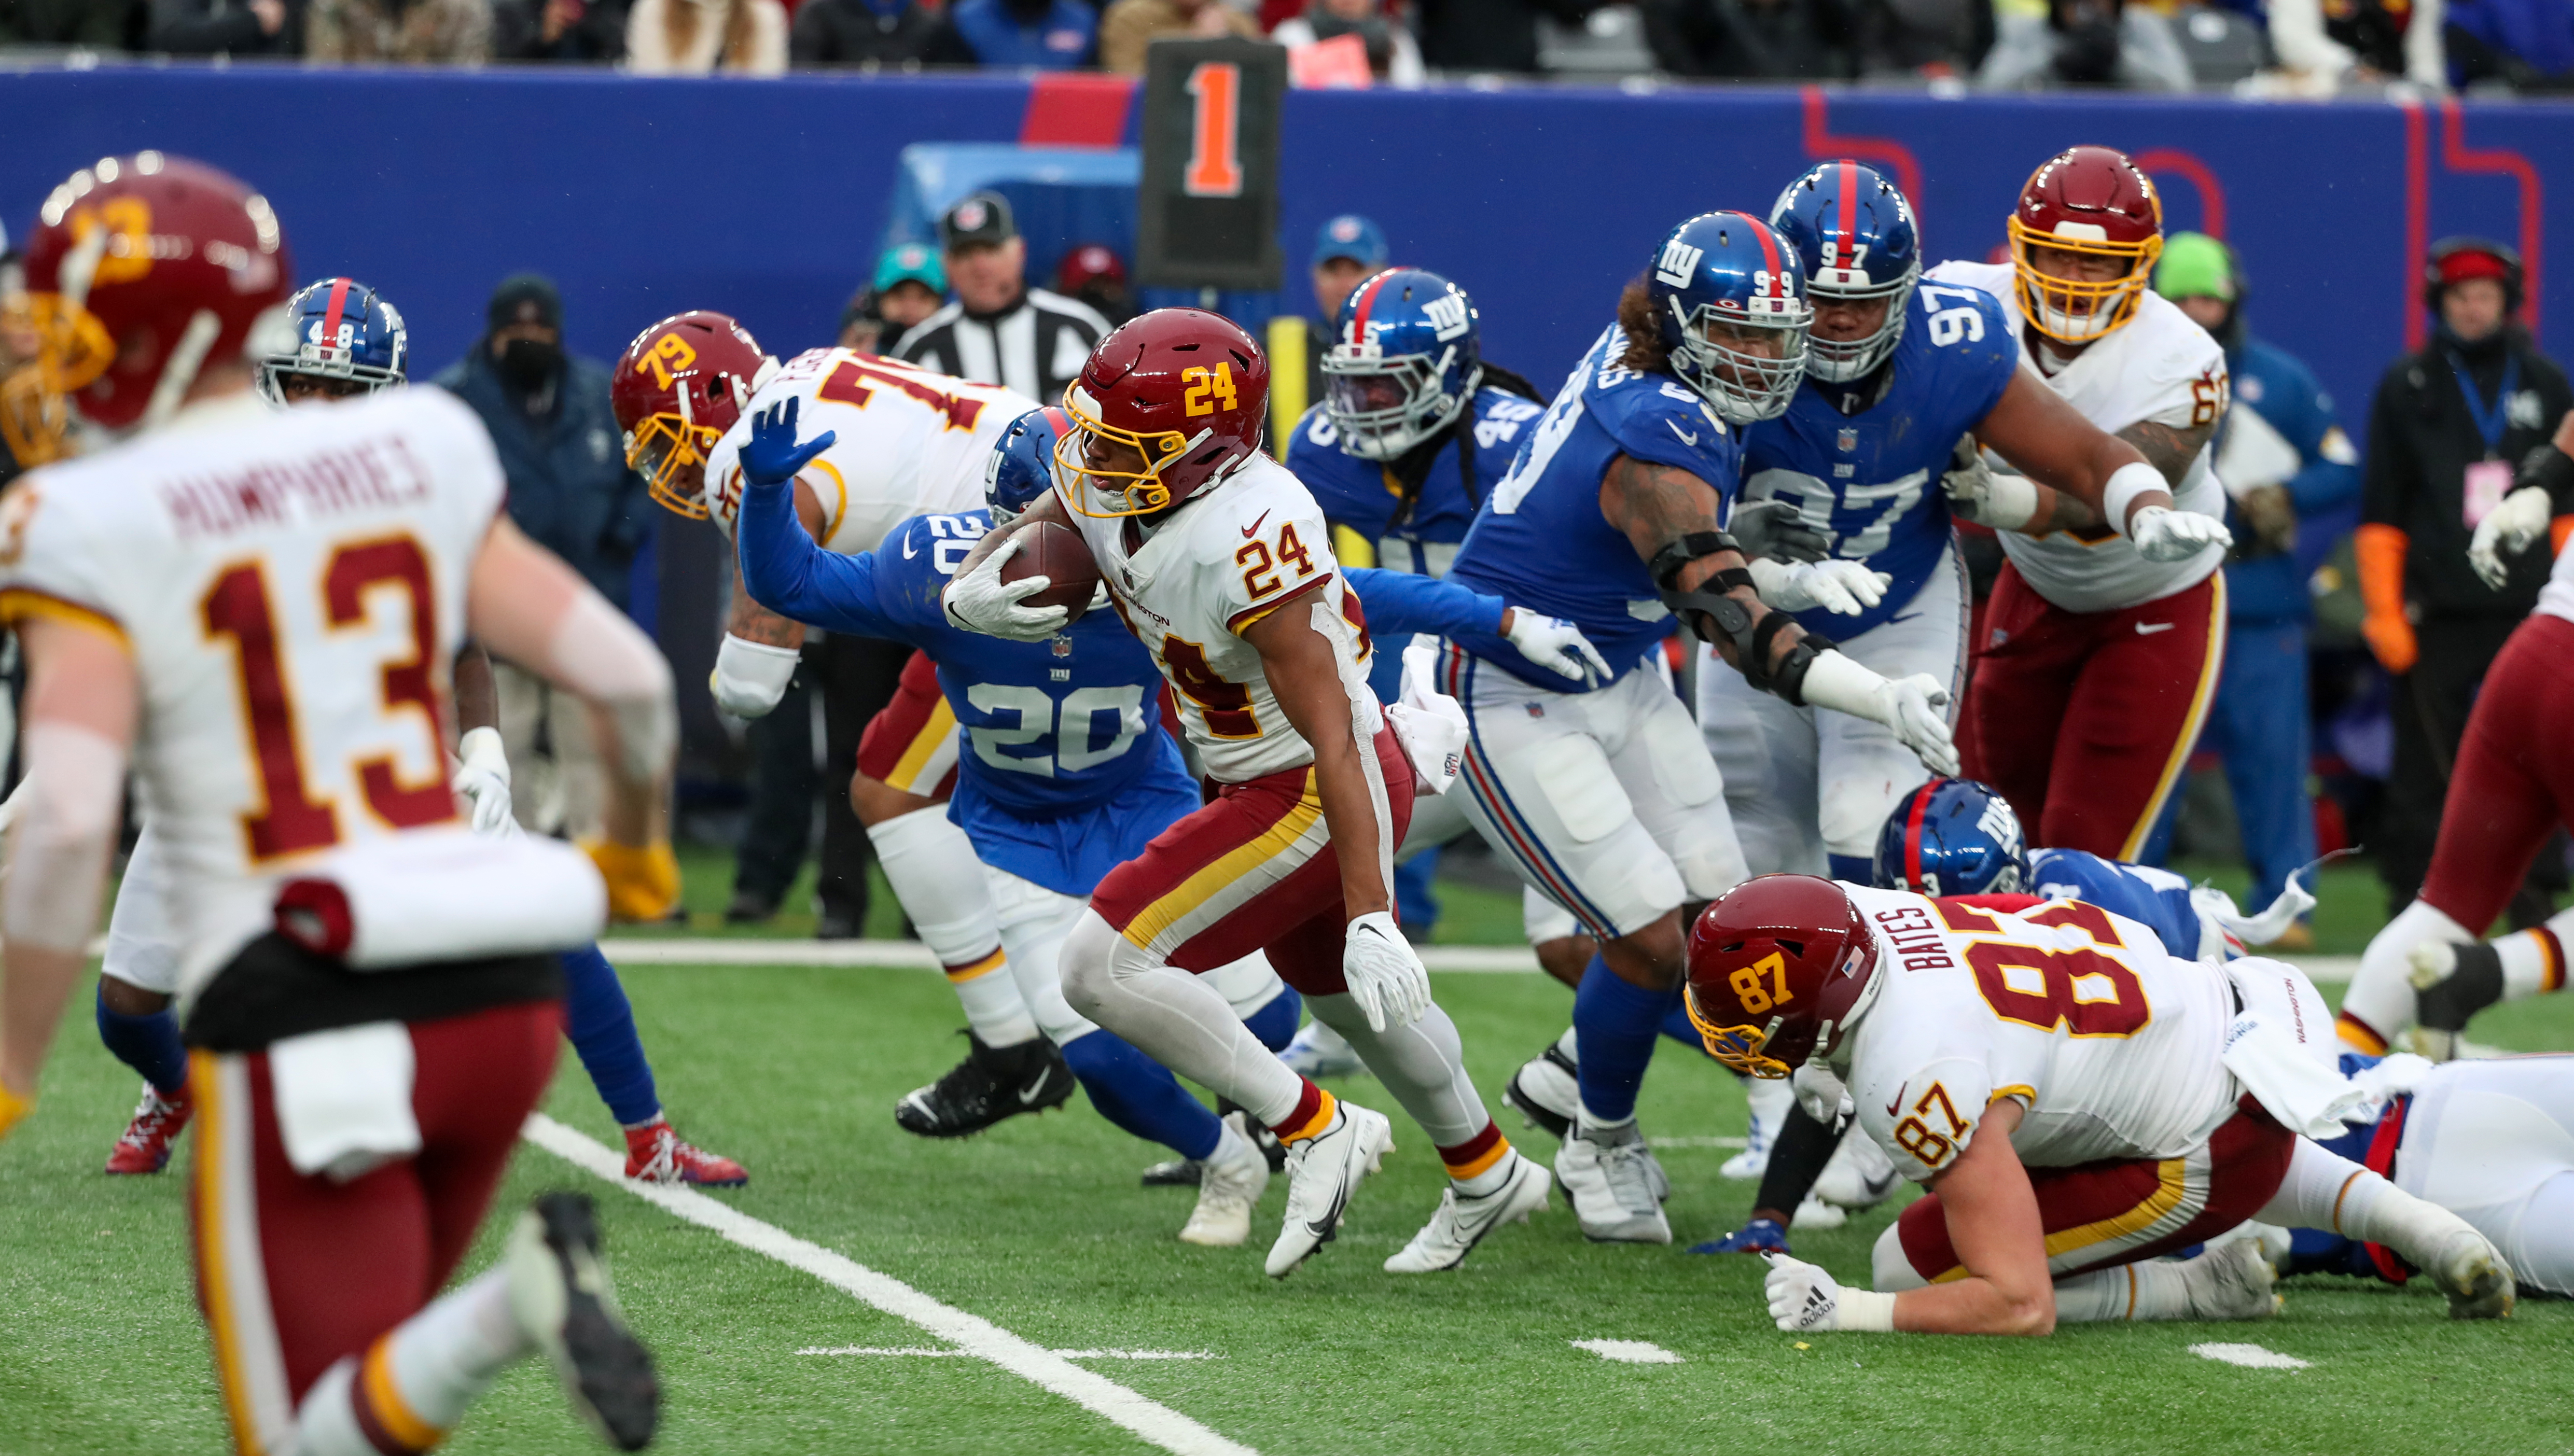 Washington Football Team running back Antonio Gibson (24) scores a rushing touchdown during the fourth quarter against the New York Giants on Sunday, Jan. 9, 2022 in East Rutherford, N.J. Washington won, 22-7.